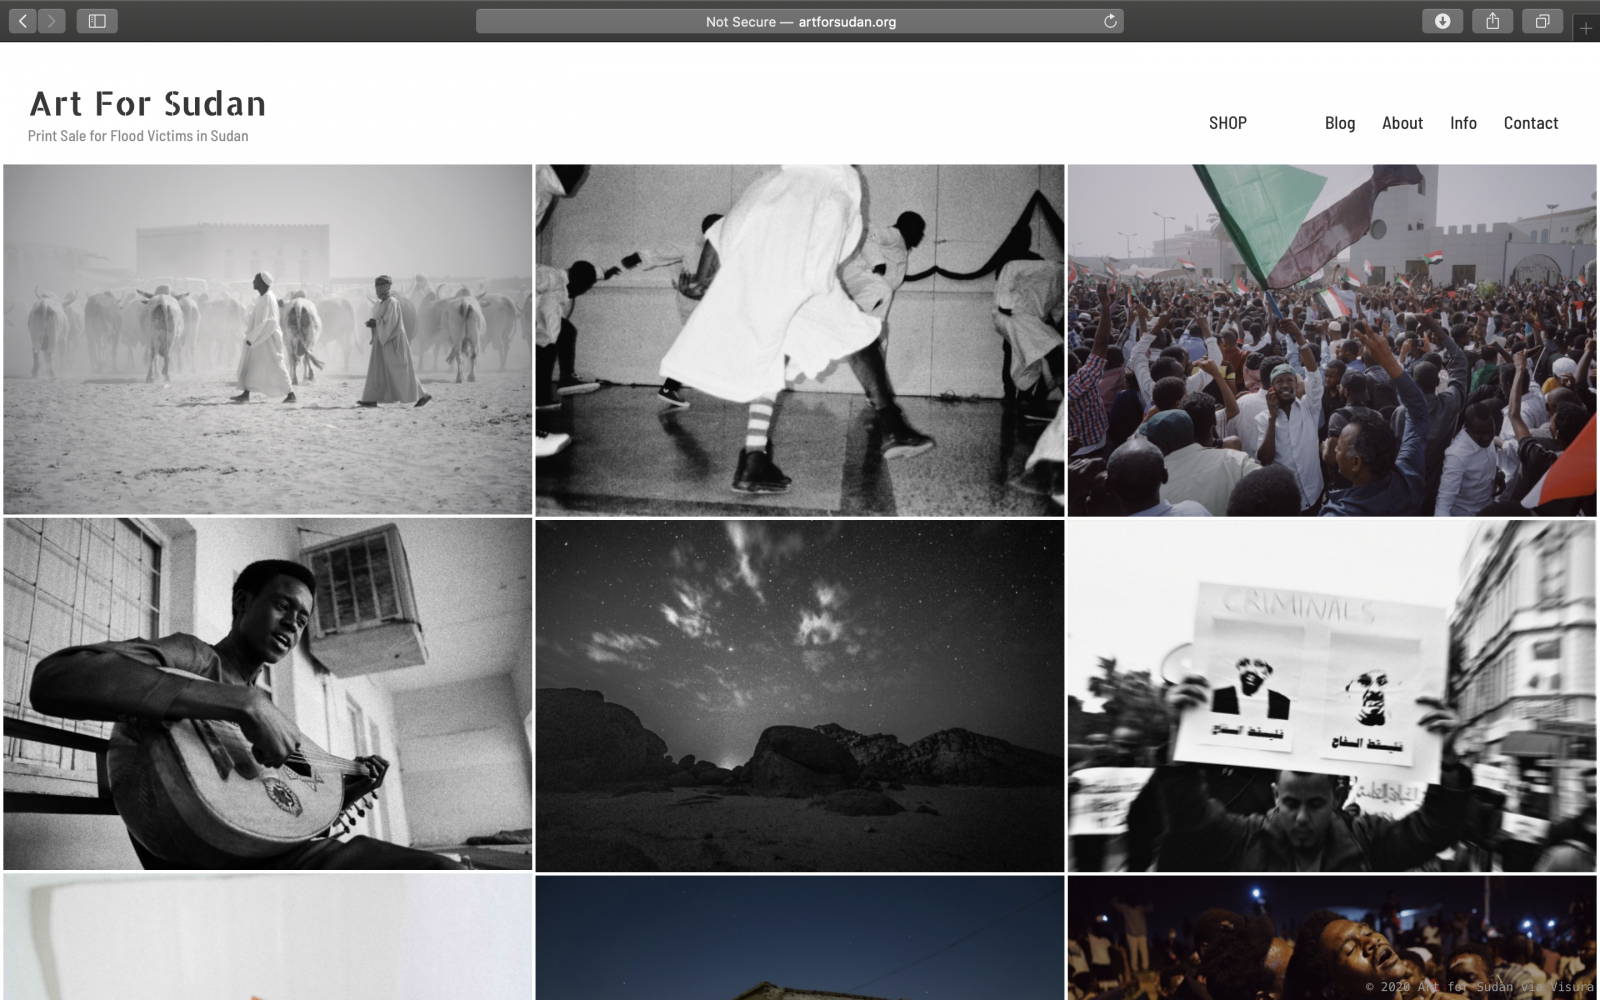 Support Sudan Flood Victims via buying photographs from this site.